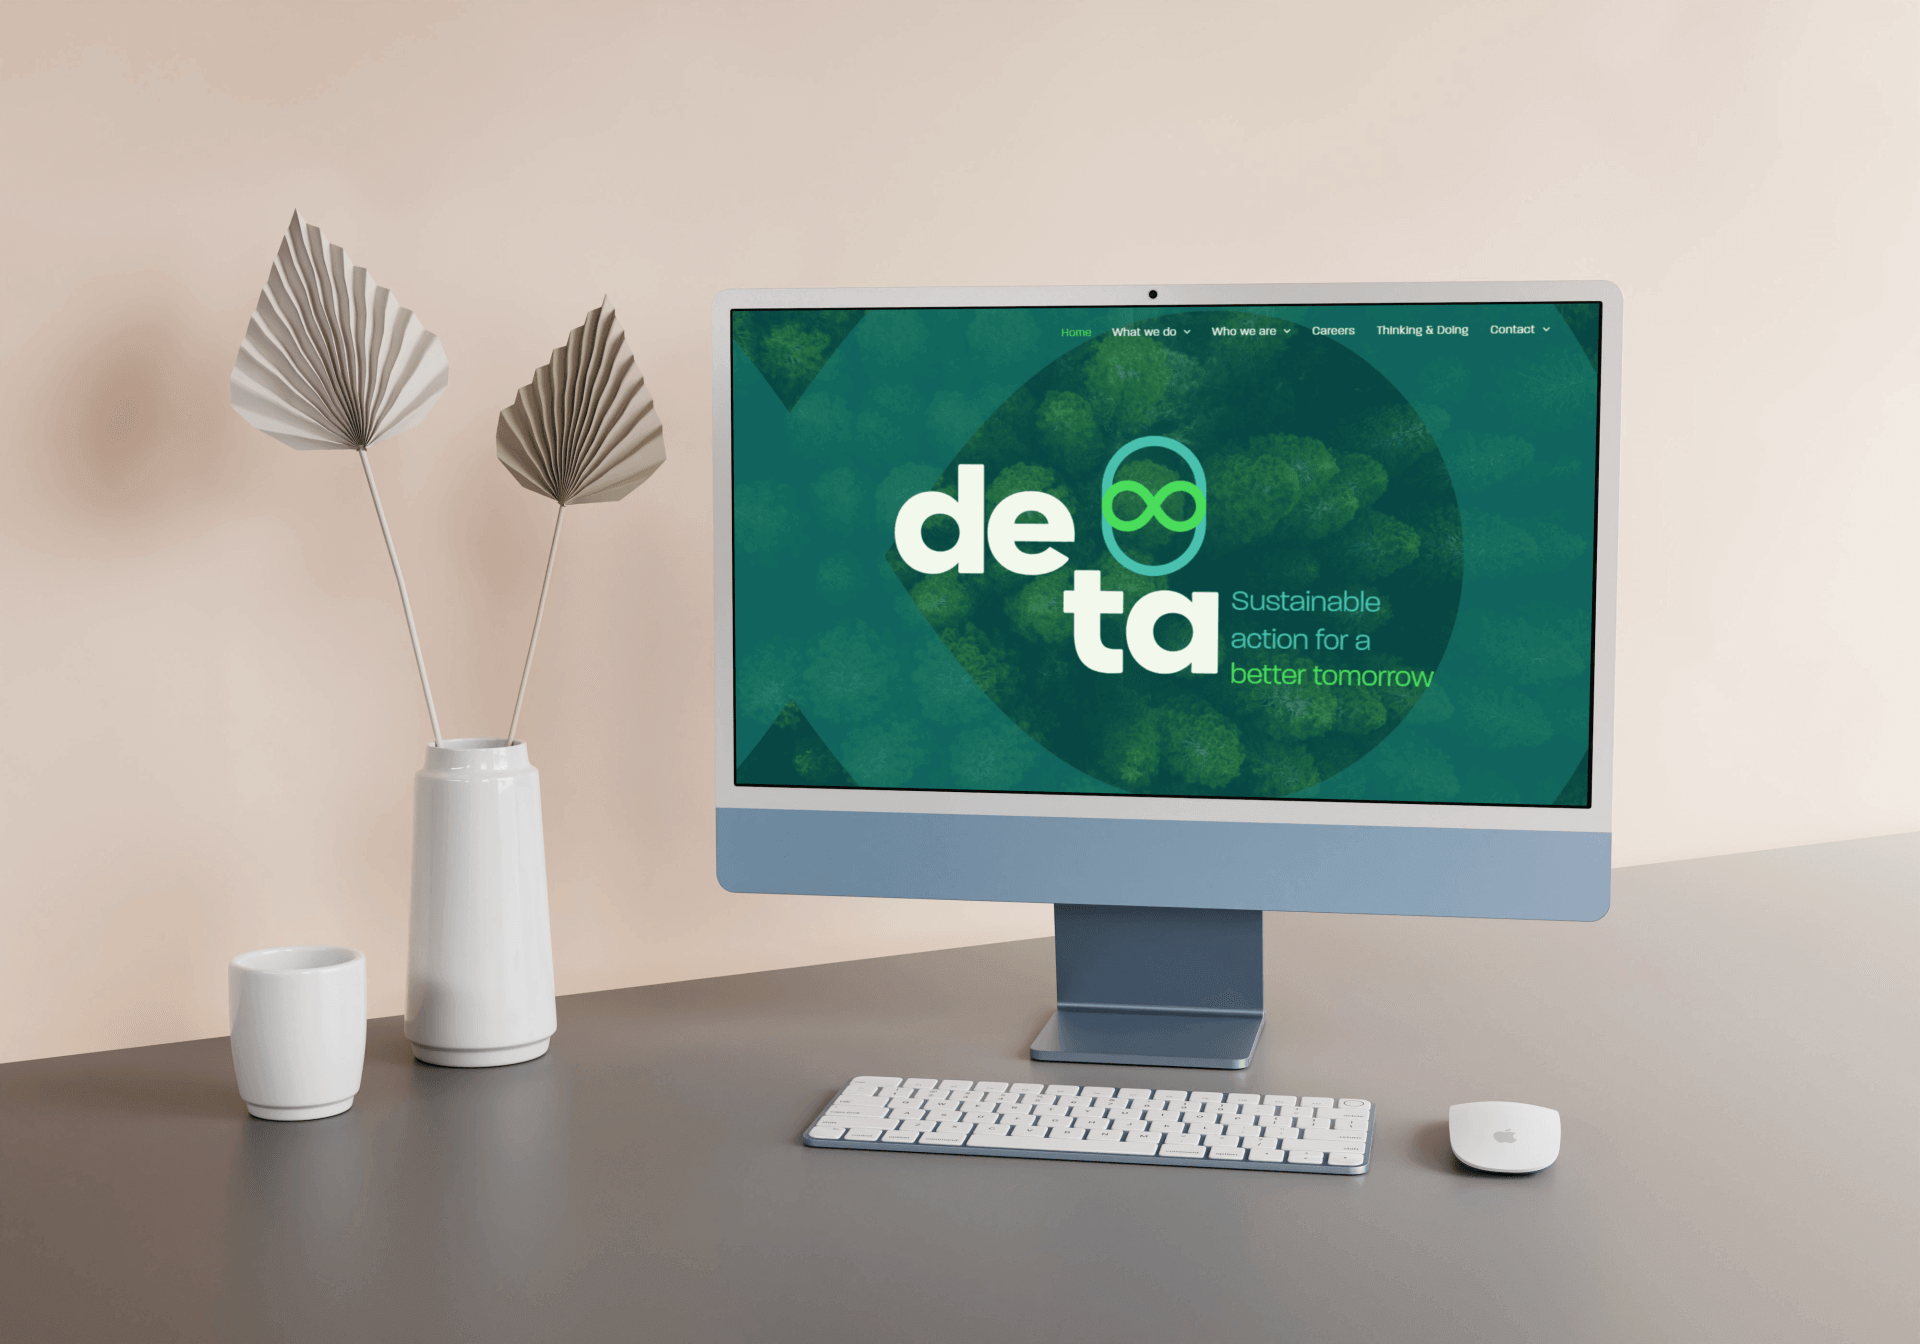 deta Sustainable action for a better tomorrow